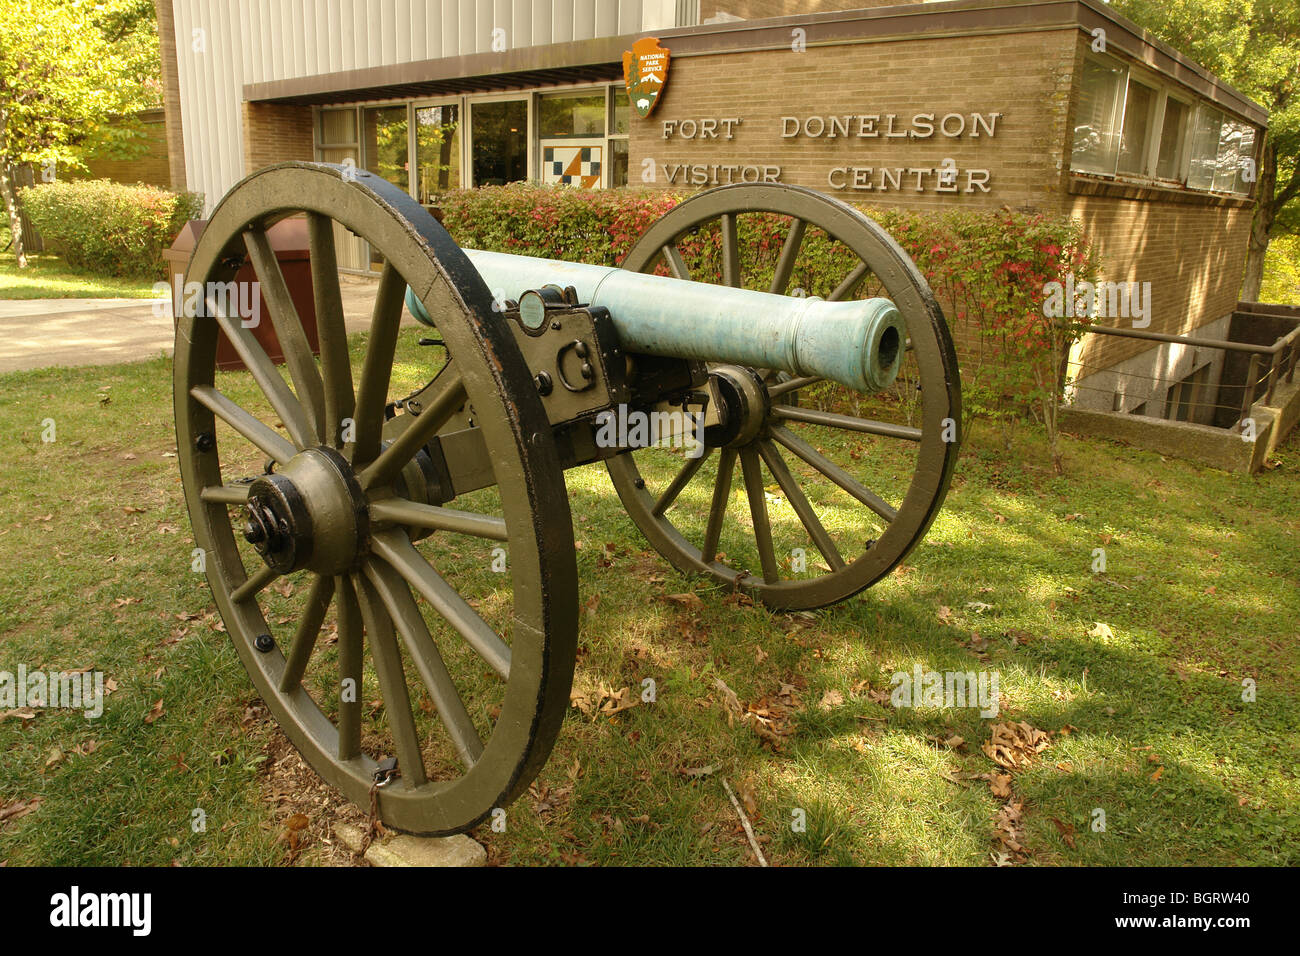 AJD62853, Fort Donelson National Battlefield, TN, Tennessee, cannon Stock Photo